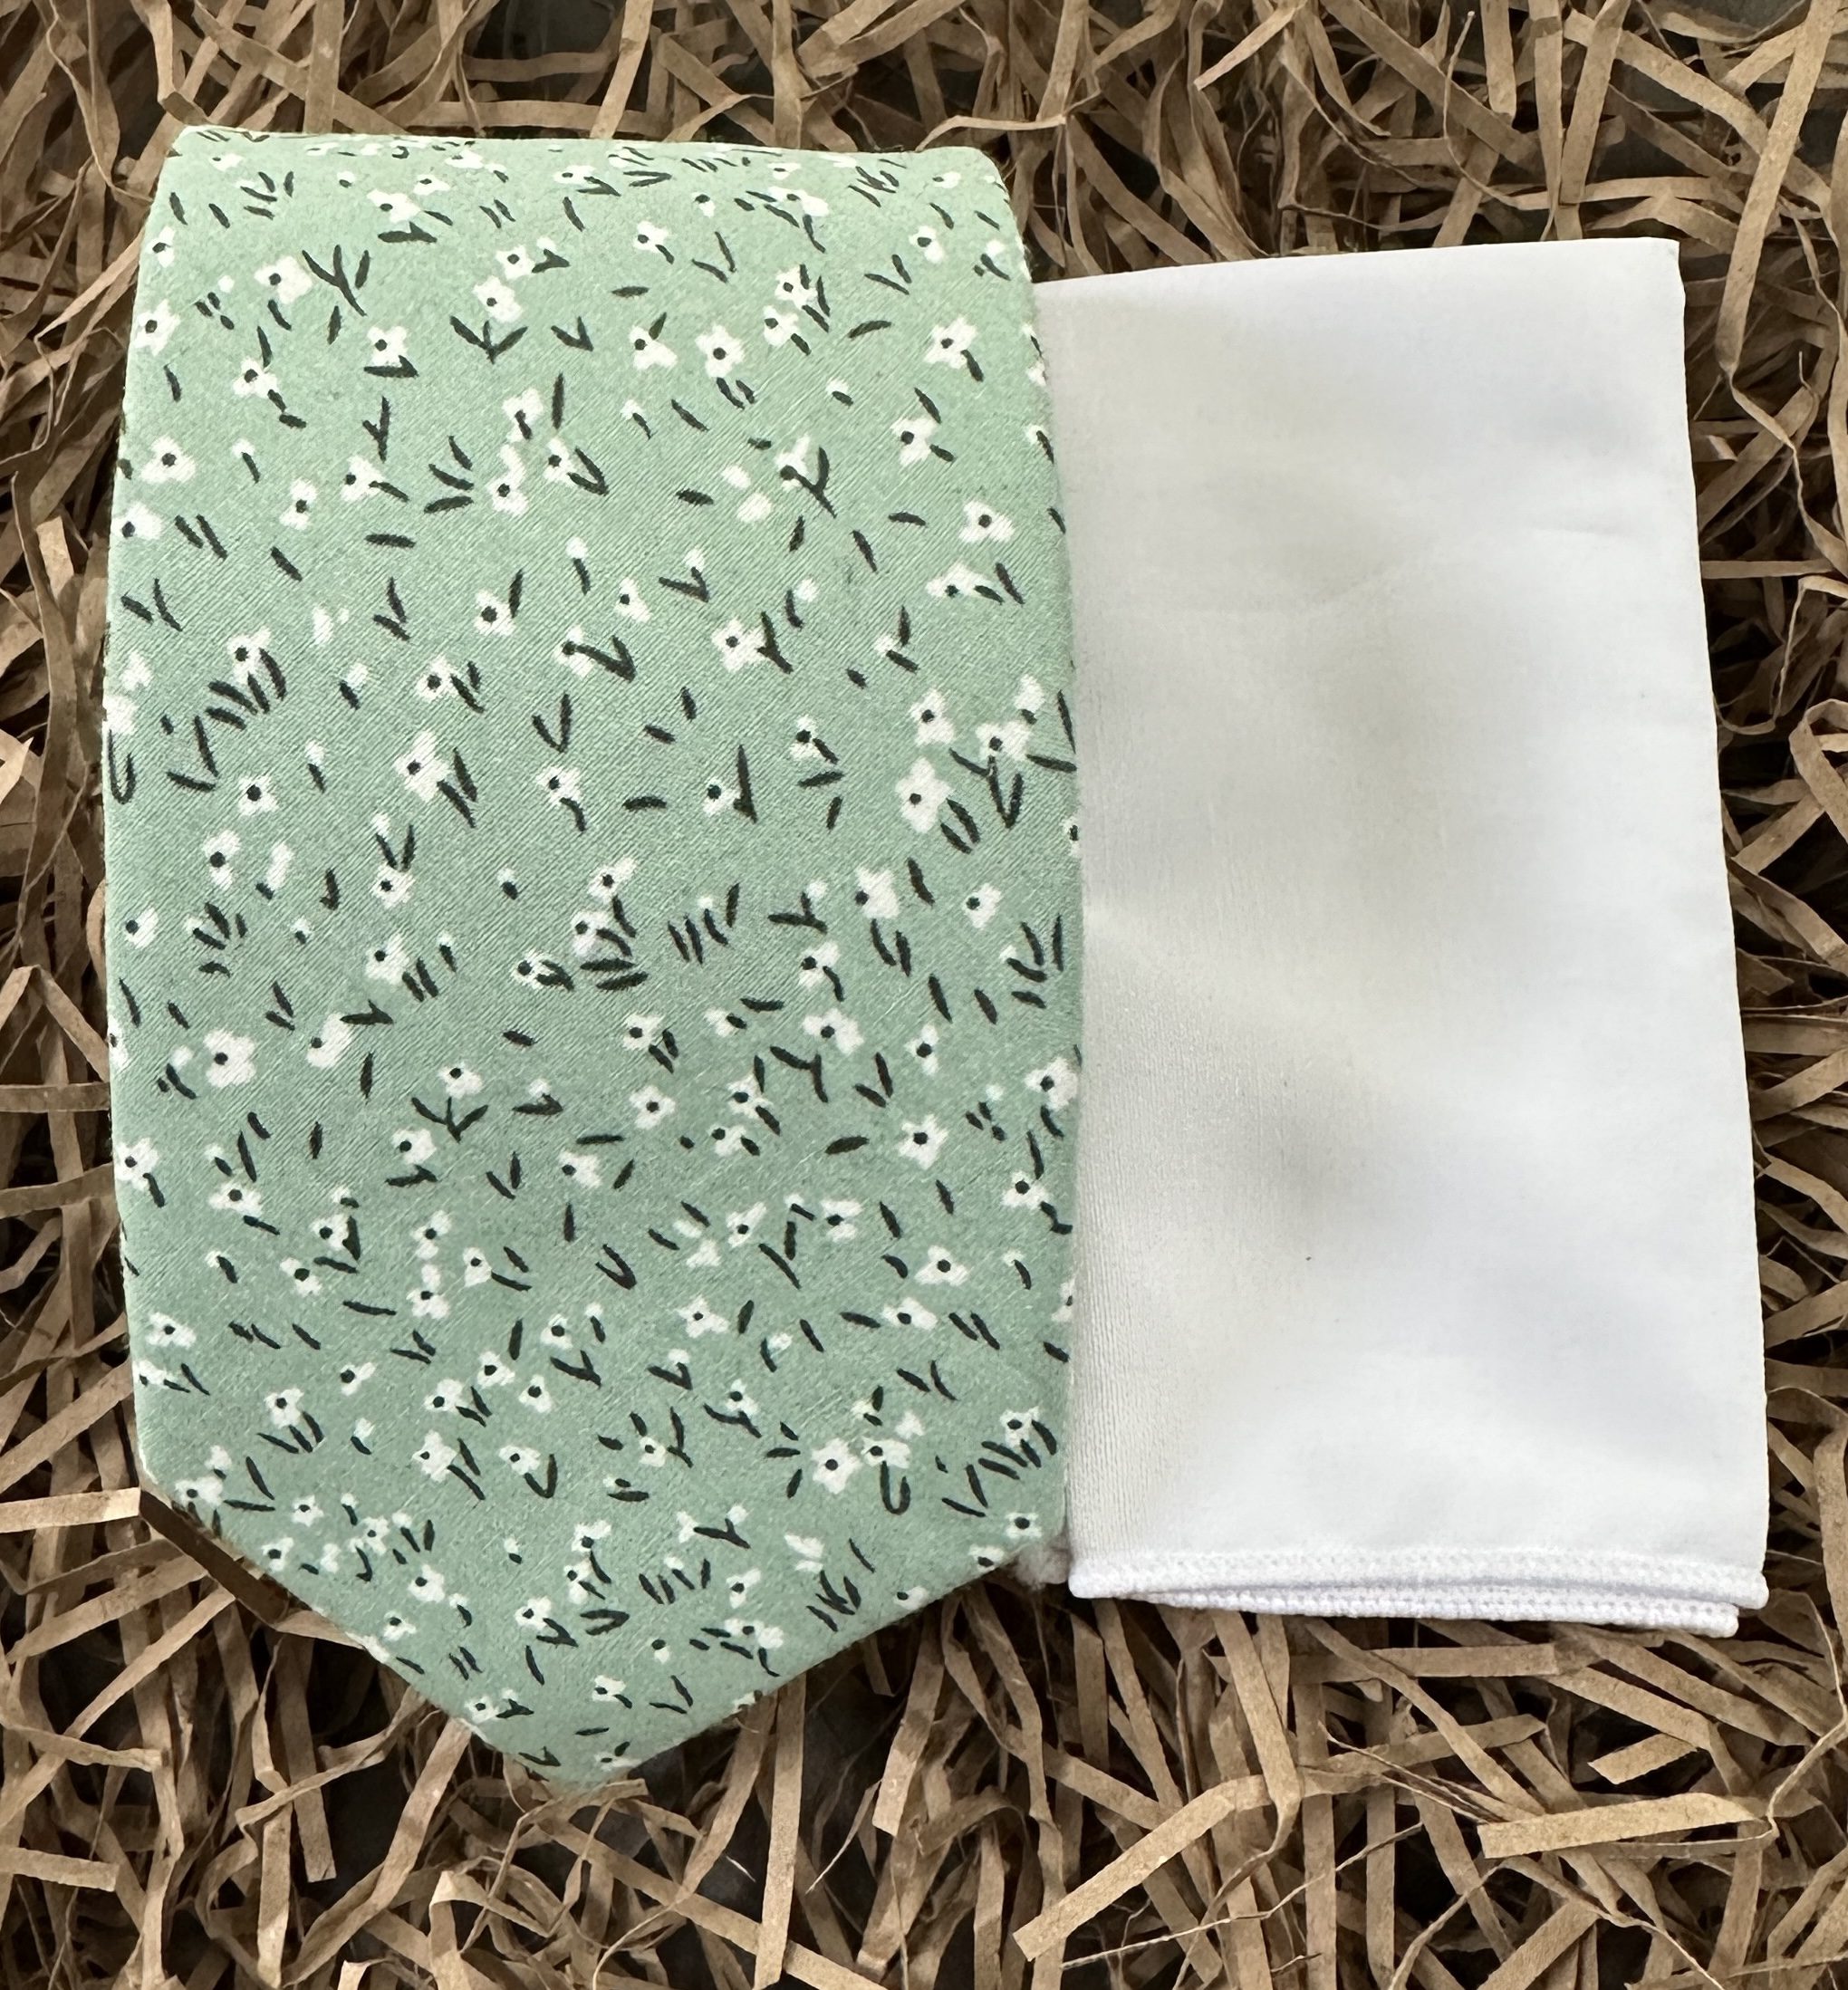 A green floral men's tie matched with a white pocket handkerchief for men's gifts, wedding attire and groomsmen gifts for instant gift giving.